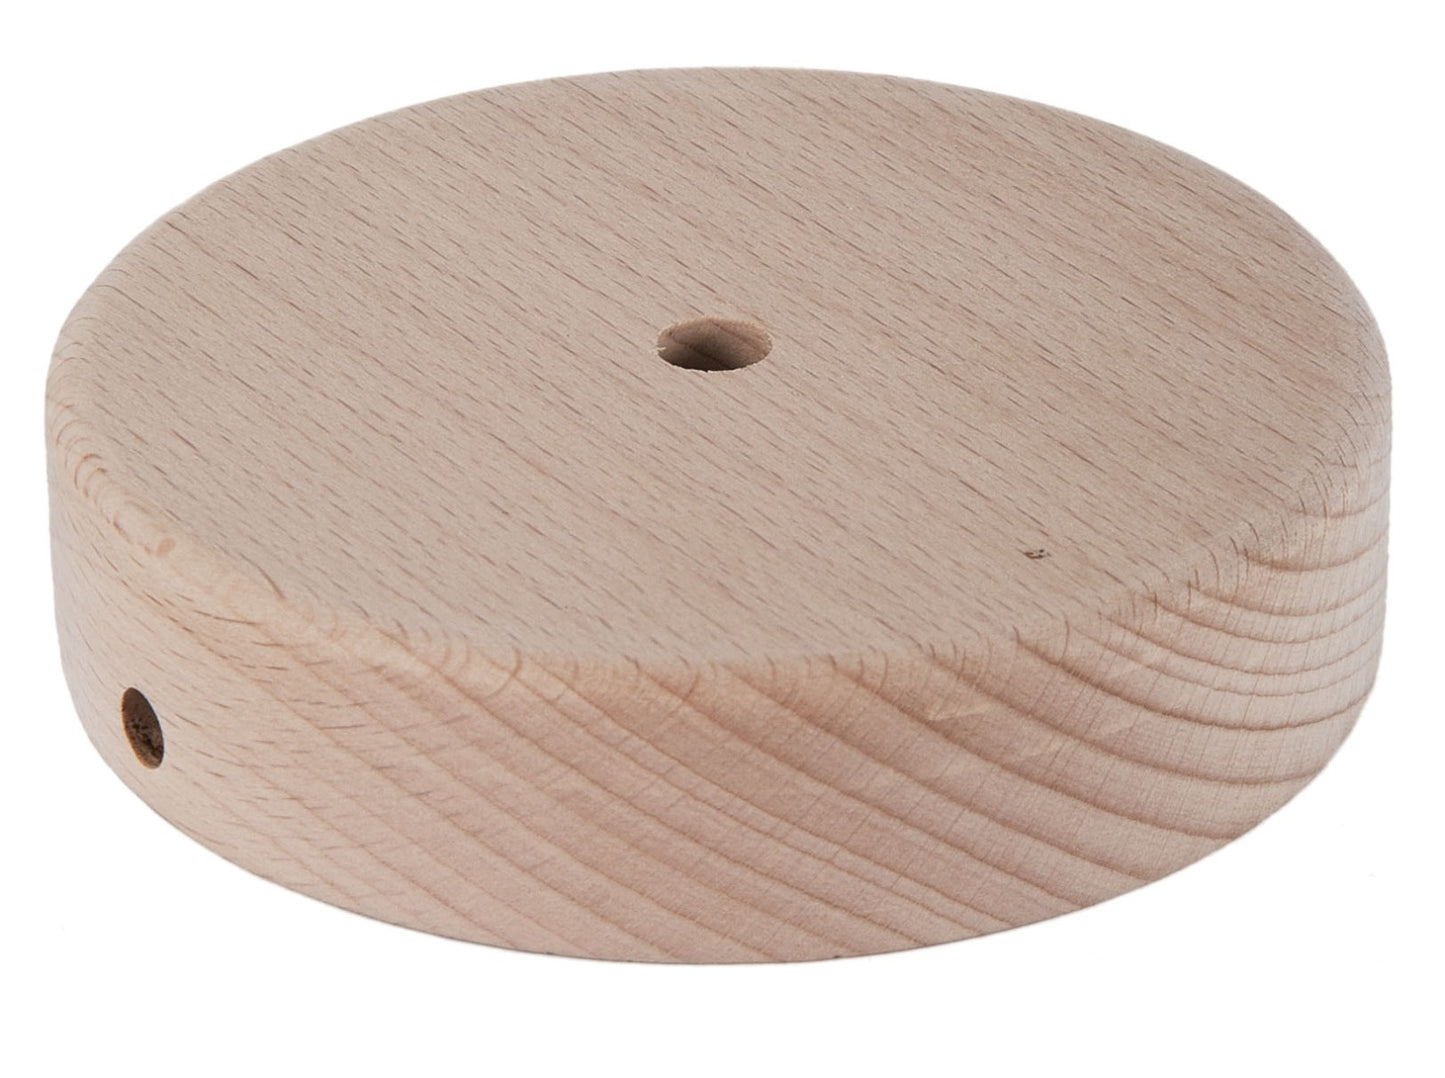 Disc Shaped Unfinished Wooden Lamp Base, Choice of Size 4 to 8" Dia. 